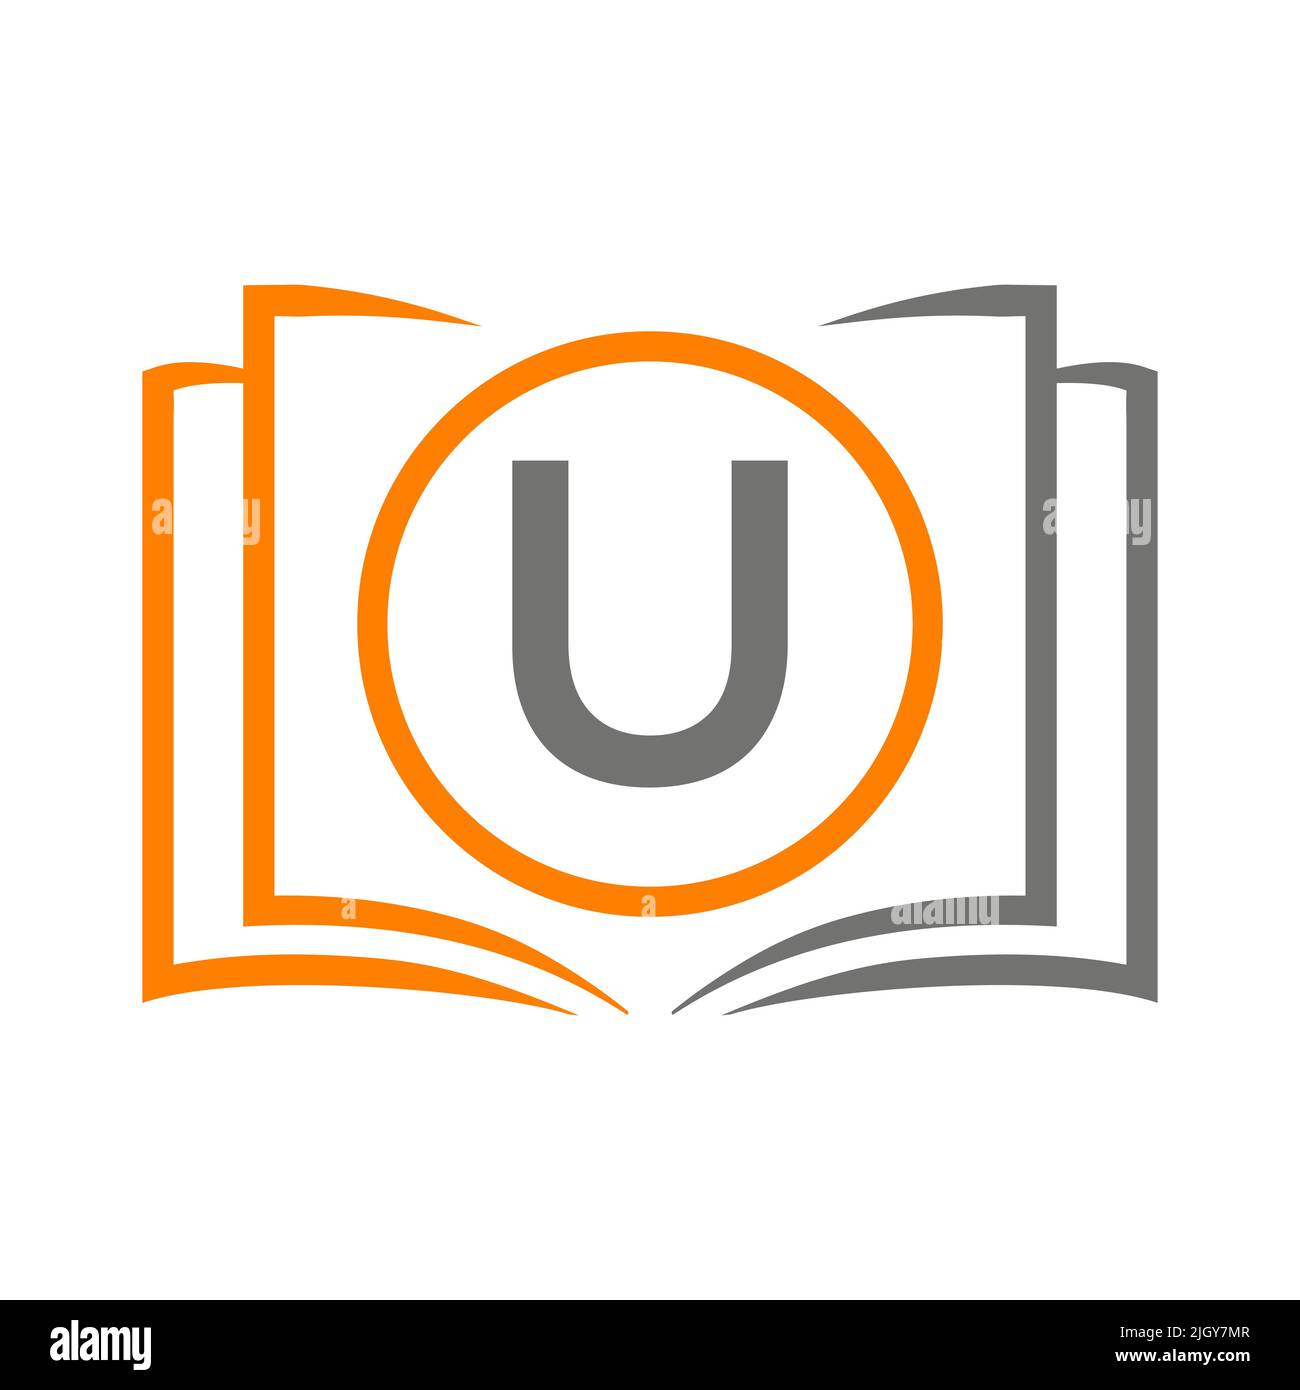 Education Logo On Letter U Template. Open Book Logo On U Letter, Initial Educational Sign Concept Template Stock Vector